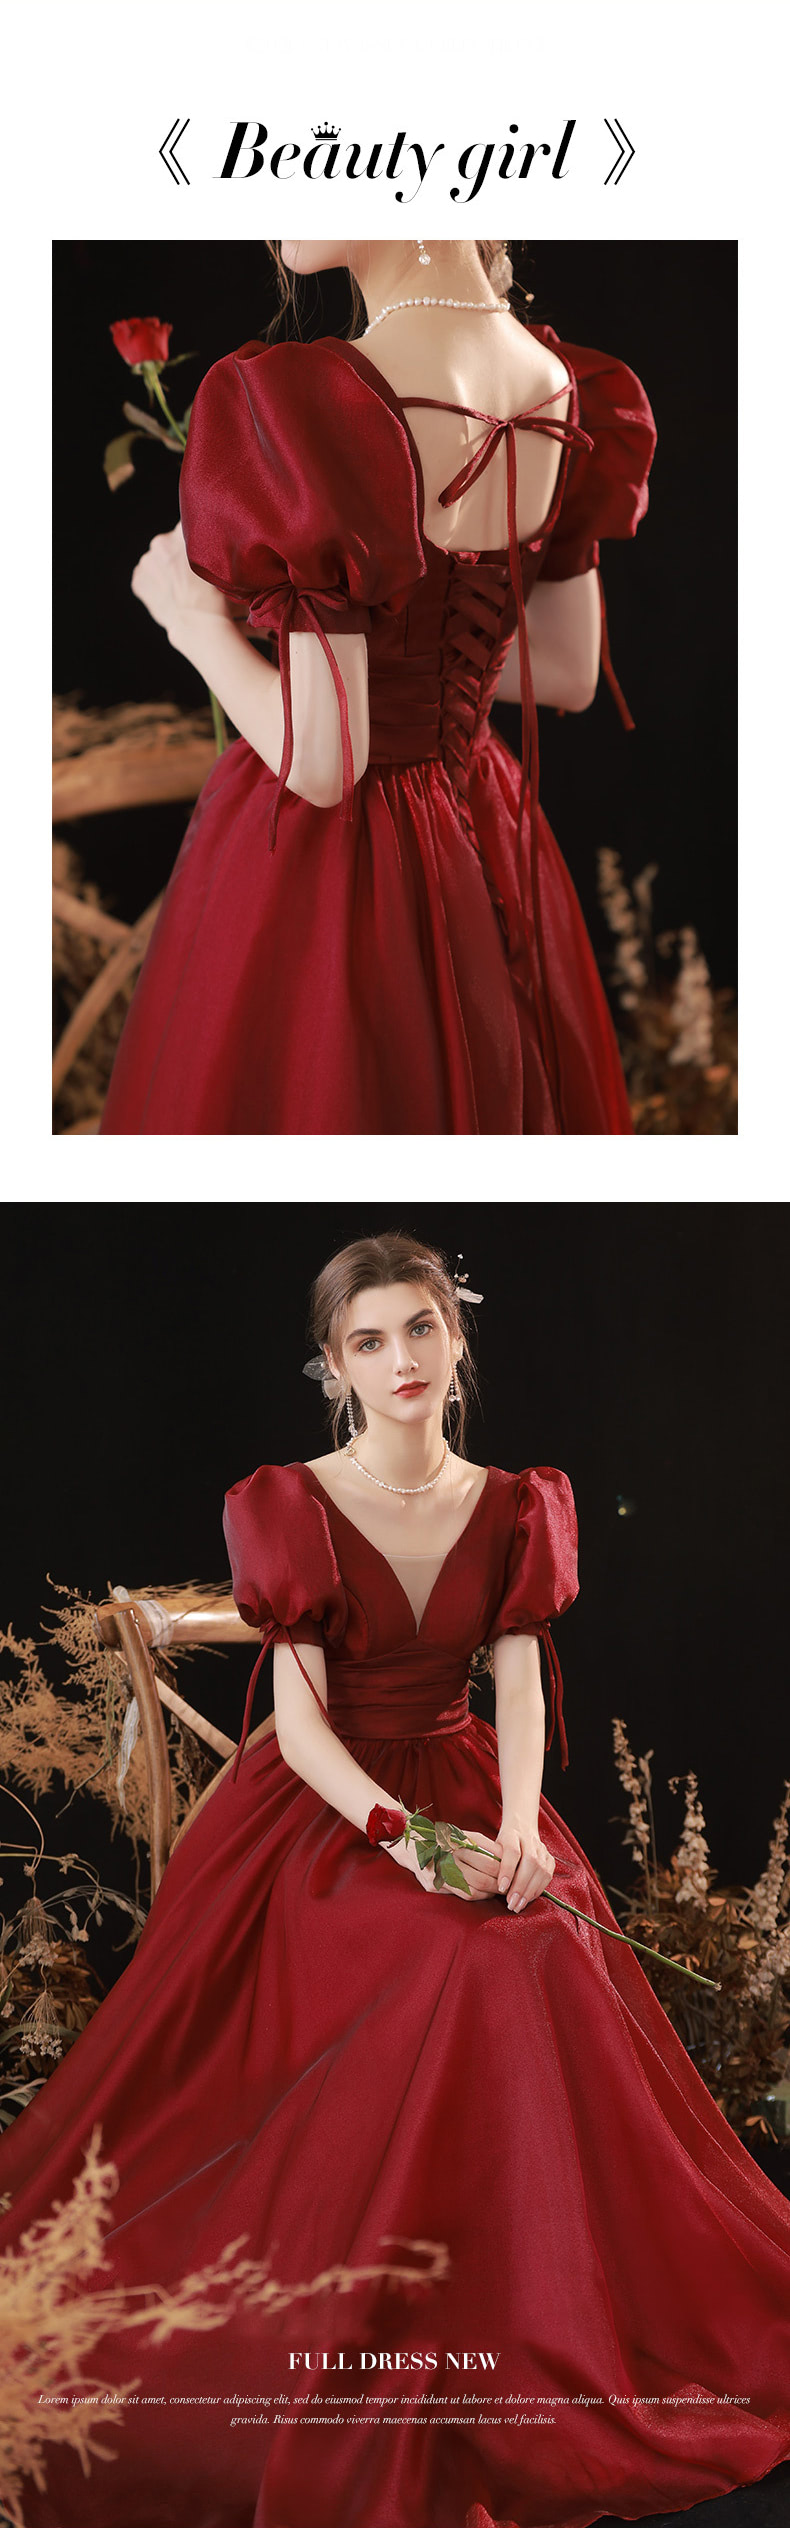 V-Neck-Short-Puff-Sleeve-Red-Prom-Party-Banquet-Evening-Dress09.jpg